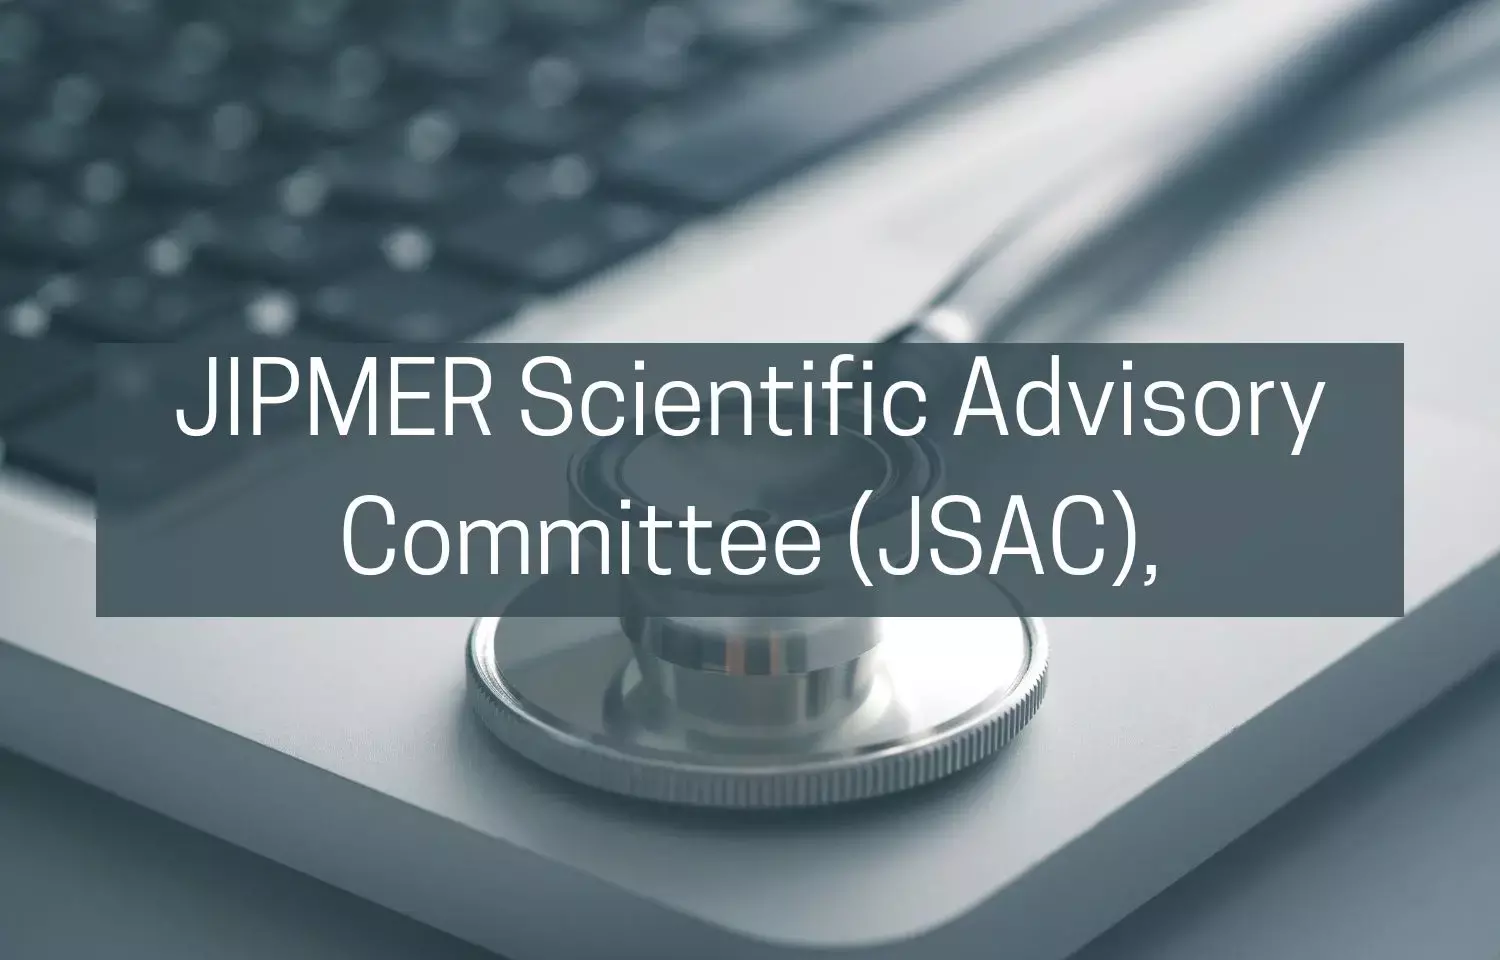 JIPMER Invites Submission Of Proposals To Scientific Advisory Committee, details